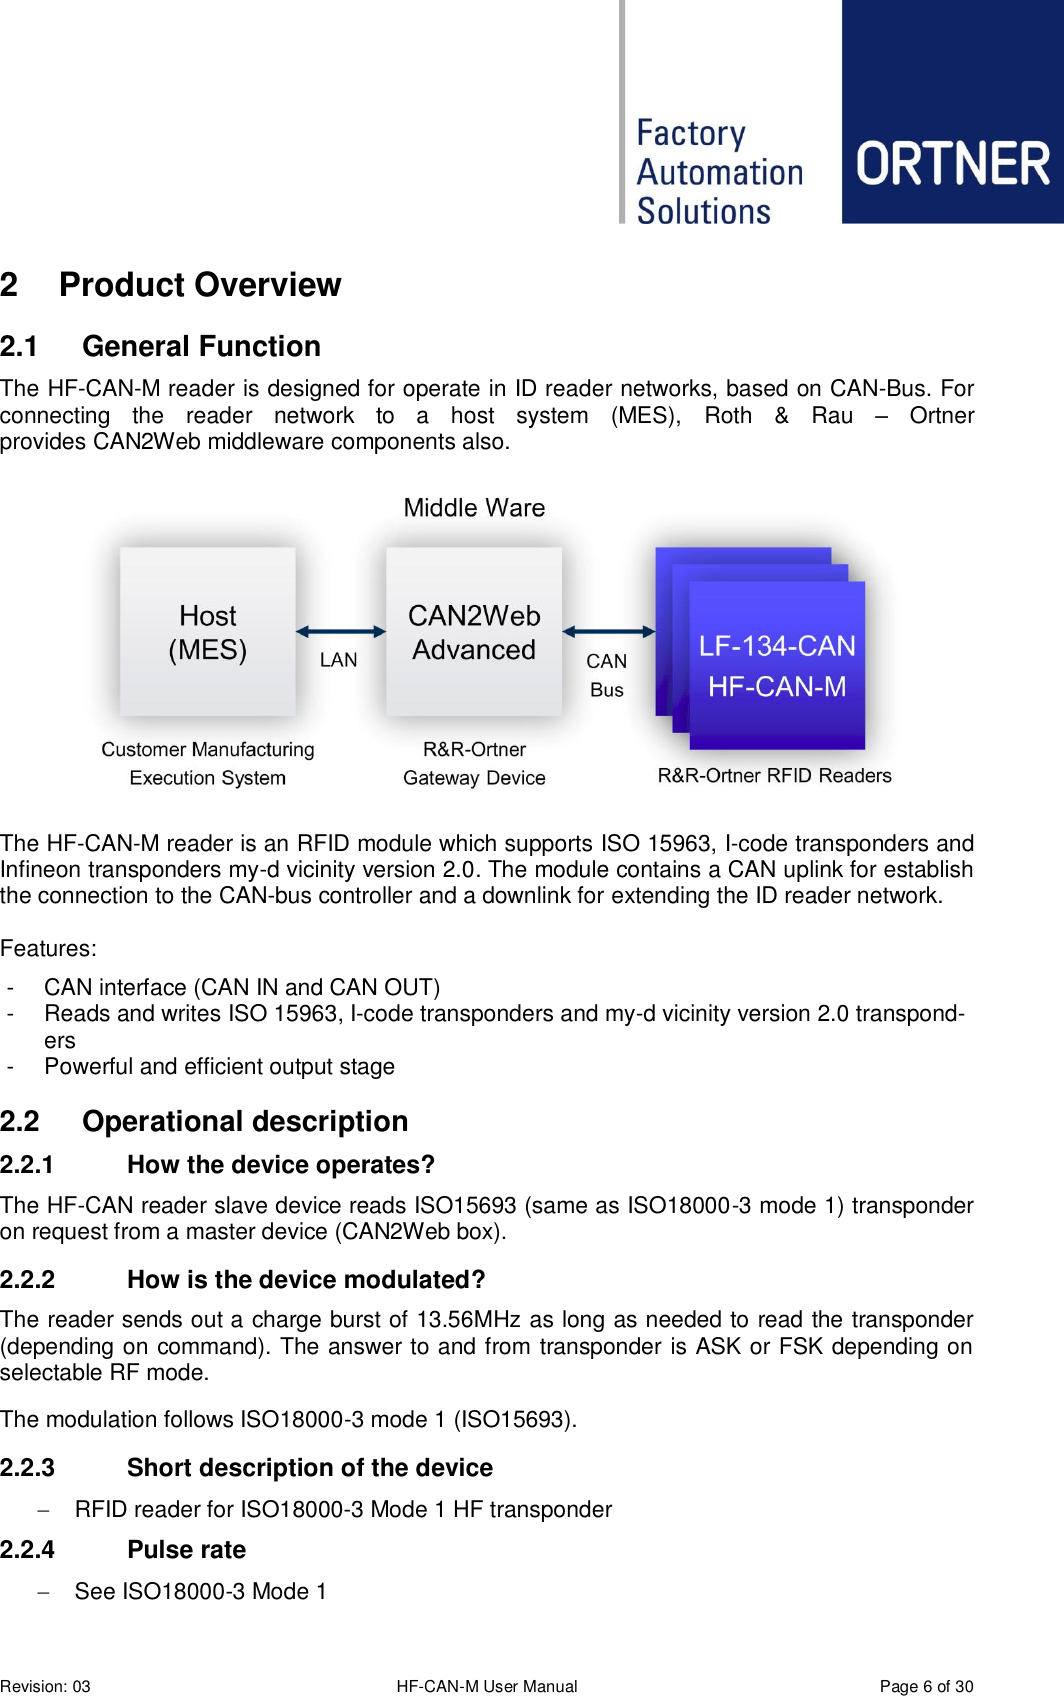  Revision: 03 HF-CAN-M User Manual  Page 6 of 30 2  Product Overview 2.1  General Function The HF-CAN-M reader is designed for operate in ID reader networks, based on CAN-Bus. For connecting  the  reader  network  to  a  host  system  (MES),  Roth  &amp;  Rau  –  Ortner provides CAN2Web middleware components also.  The HF-CAN-M reader is an RFID module which supports ISO 15963, I-code transponders and Infineon transponders my-d vicinity version 2.0. The module contains a CAN uplink for establish the connection to the CAN-bus controller and a downlink for extending the ID reader network.  Features: -  CAN interface (CAN IN and CAN OUT) -  Reads and writes ISO 15963, I-code transponders and my-d vicinity version 2.0 transpond-ers -  Powerful and efficient output stage 2.2  Operational description 2.2.1  How the device operates? The HF-CAN reader slave device reads ISO15693 (same as ISO18000-3 mode 1) transponder on request from a master device (CAN2Web box). 2.2.2  How is the device modulated? The reader sends out a charge burst of 13.56MHz as long as needed to read the transponder (depending on command). The answer to and from transponder is ASK or FSK depending on selectable RF mode. The modulation follows ISO18000-3 mode 1 (ISO15693). 2.2.3  Short description of the device   RFID reader for ISO18000-3 Mode 1 HF transponder 2.2.4  Pulse rate   See ISO18000-3 Mode 1 